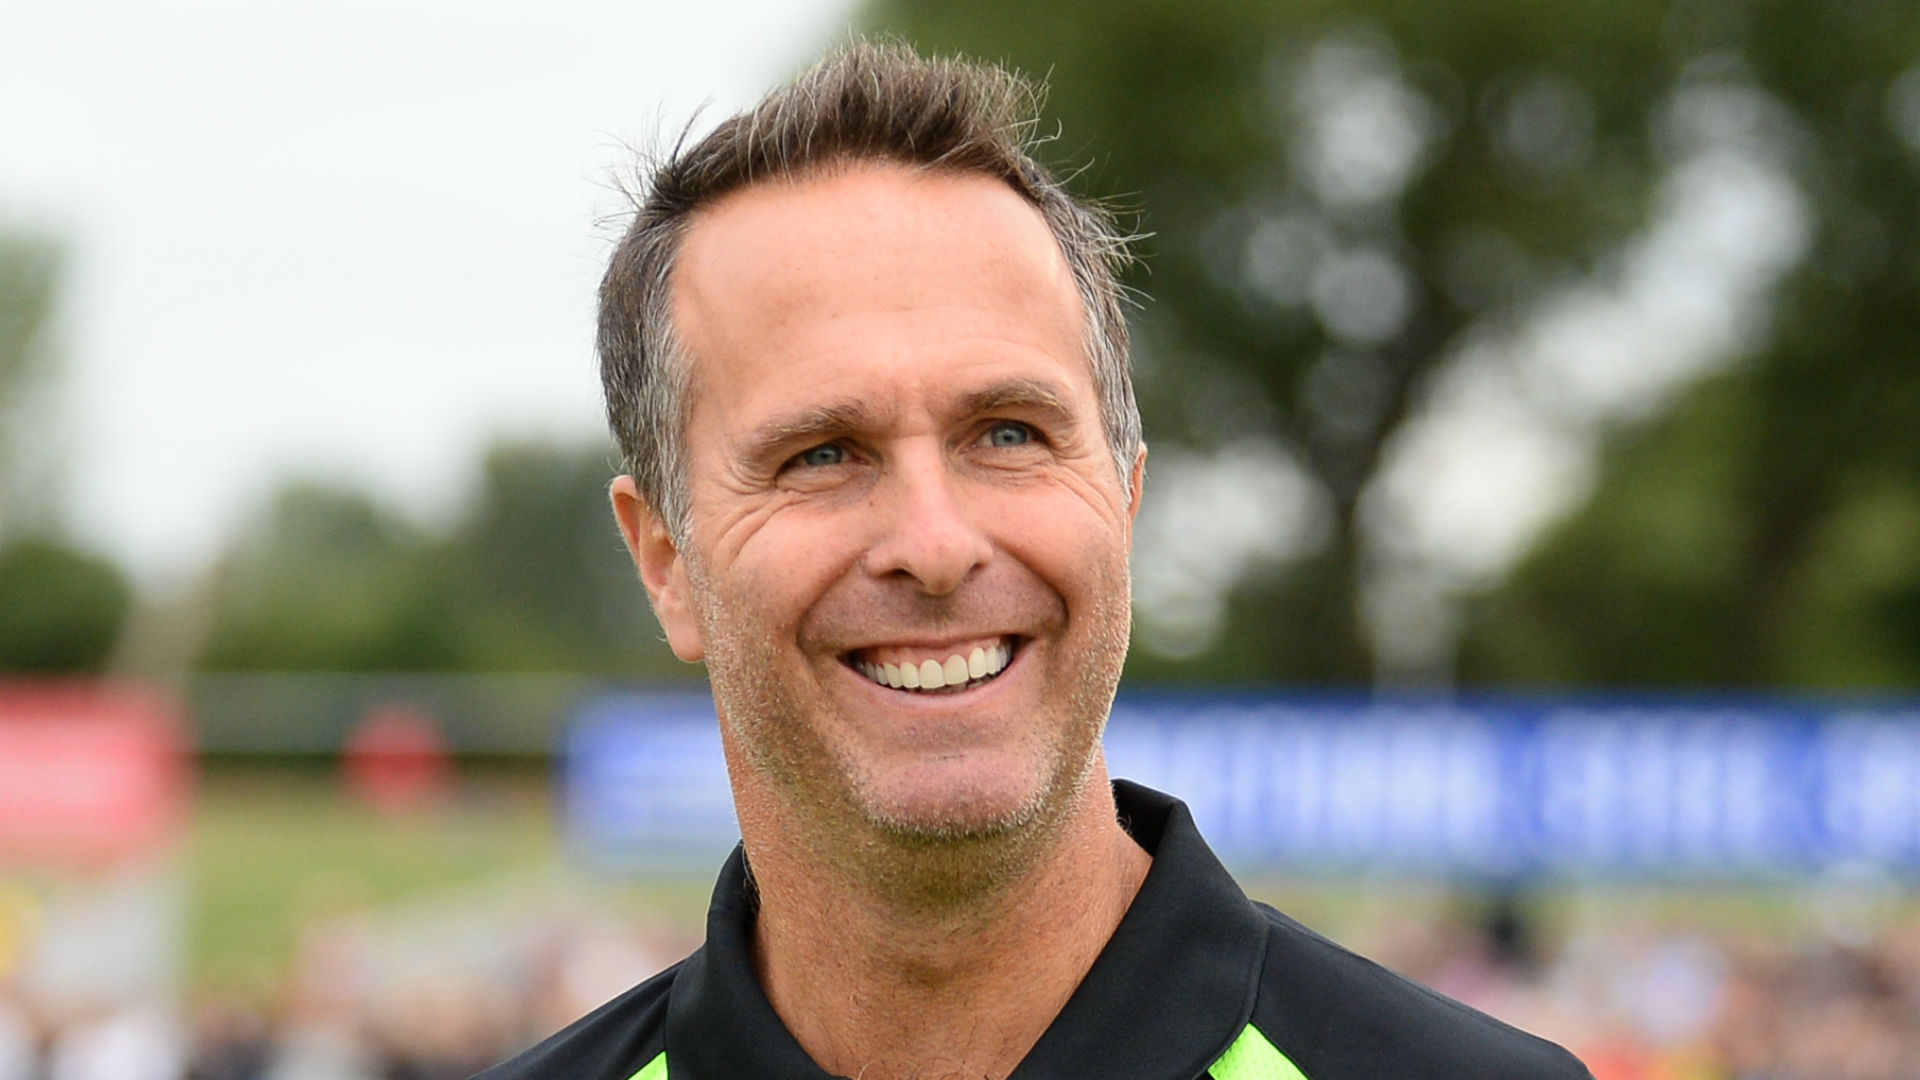 England are chasing a first Cricket World Cup this year on home turf and Michael Vaughan sees the merits of hosting the competition.